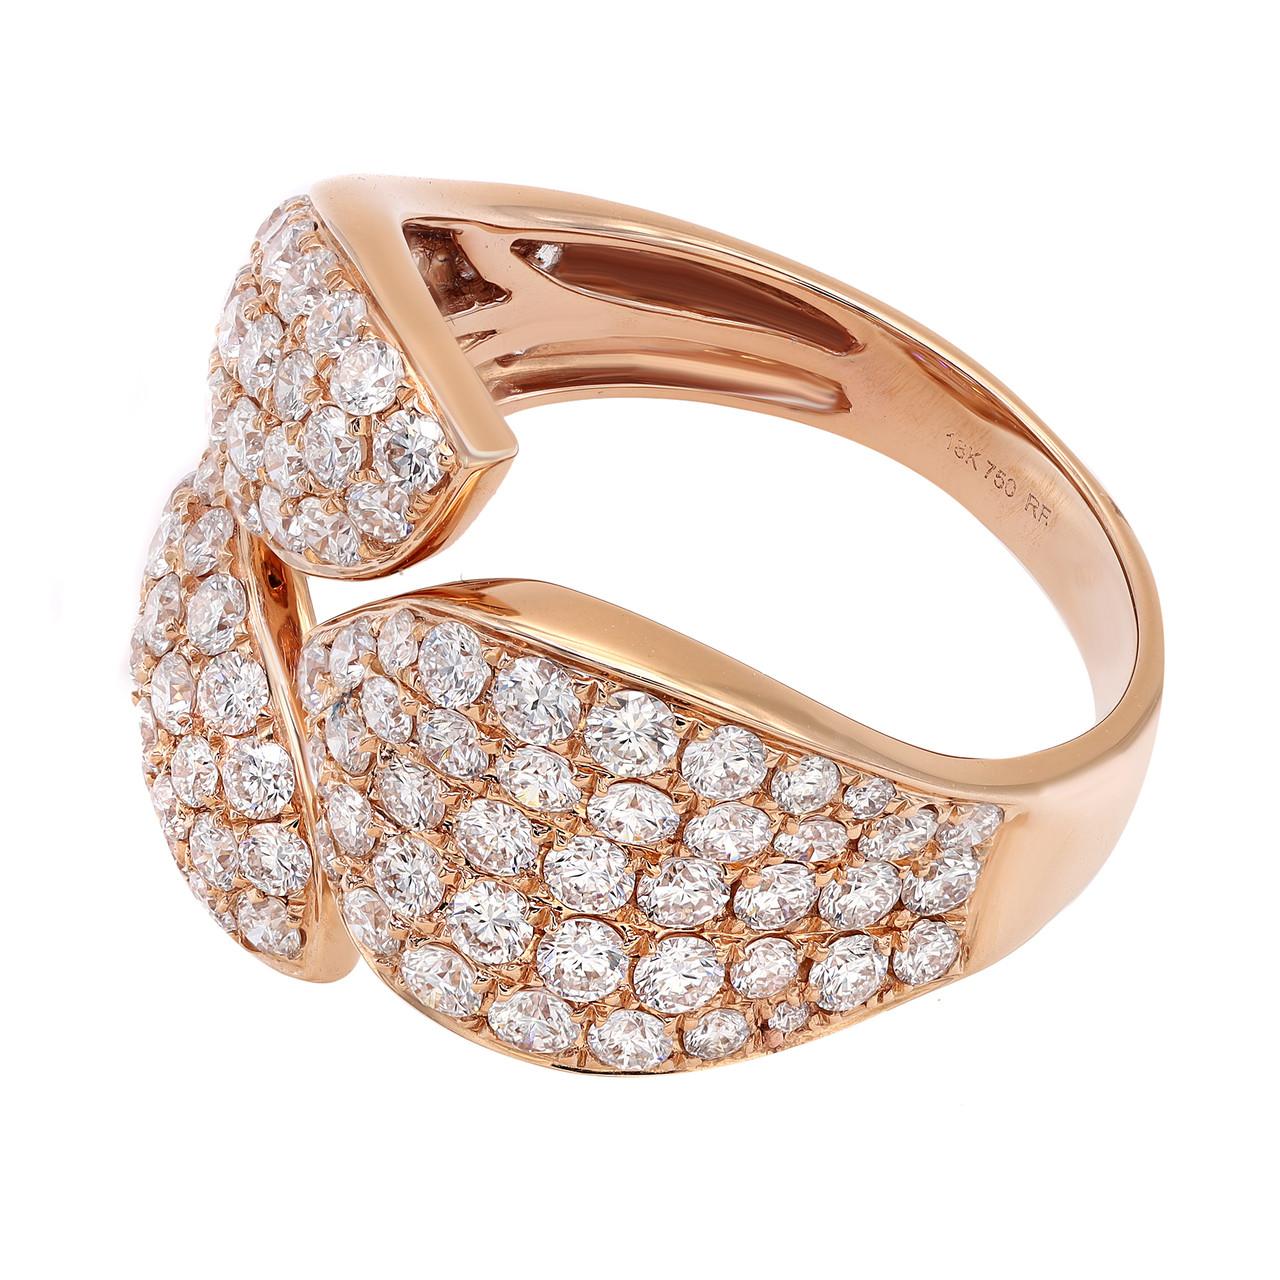 Elevate your style with the breathtaking 2.00 Carat Pave Set Round Cut Diamond Ring in 18K Rose Gold. This enchanting ring combines elegance with a touch of whimsy. Crafted with precision, it features a brilliant bypass design adorned with dazzling